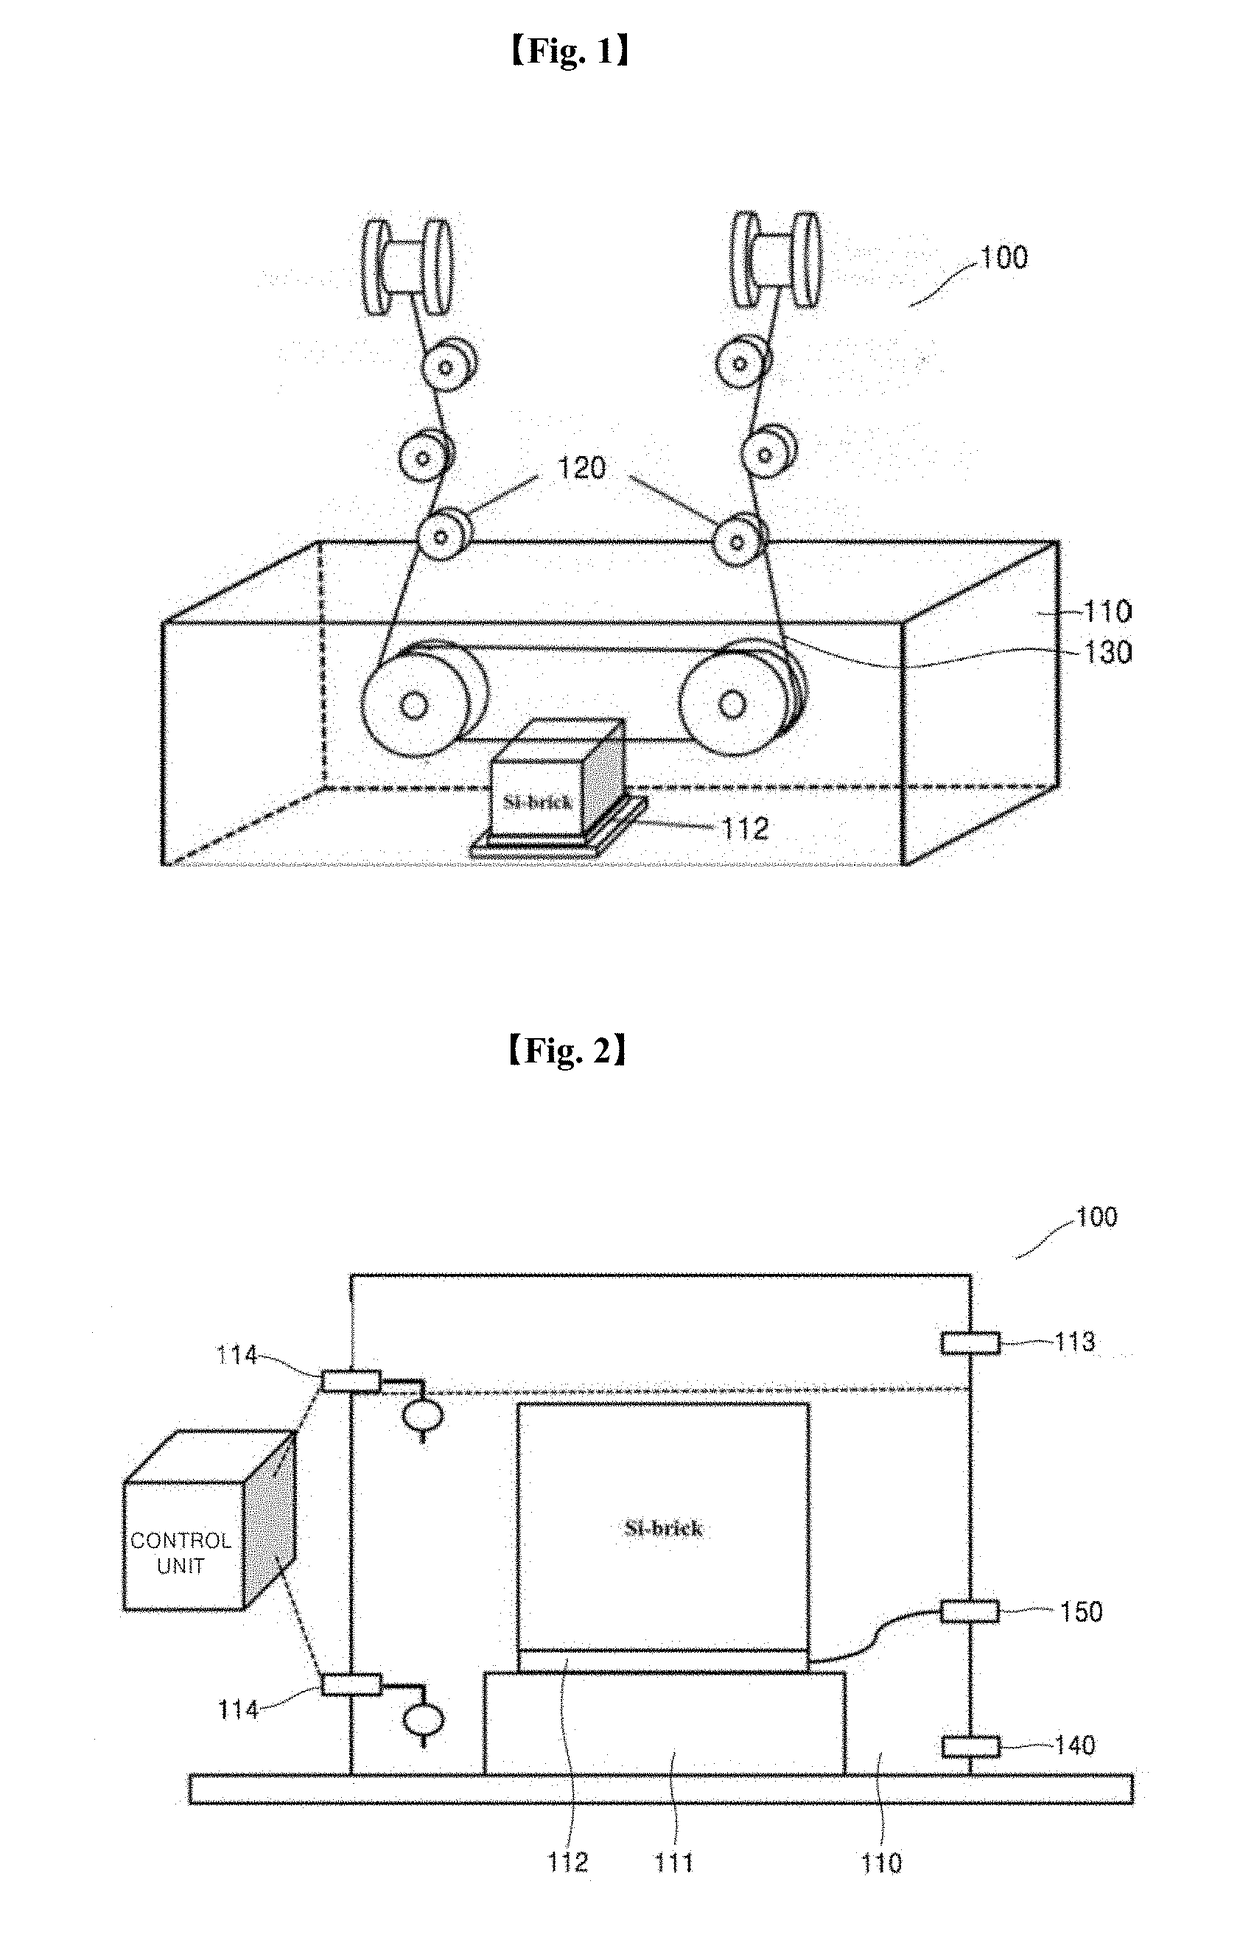 Silicon ingot slicing apparatus using microbubbles and wire electric discharge machining